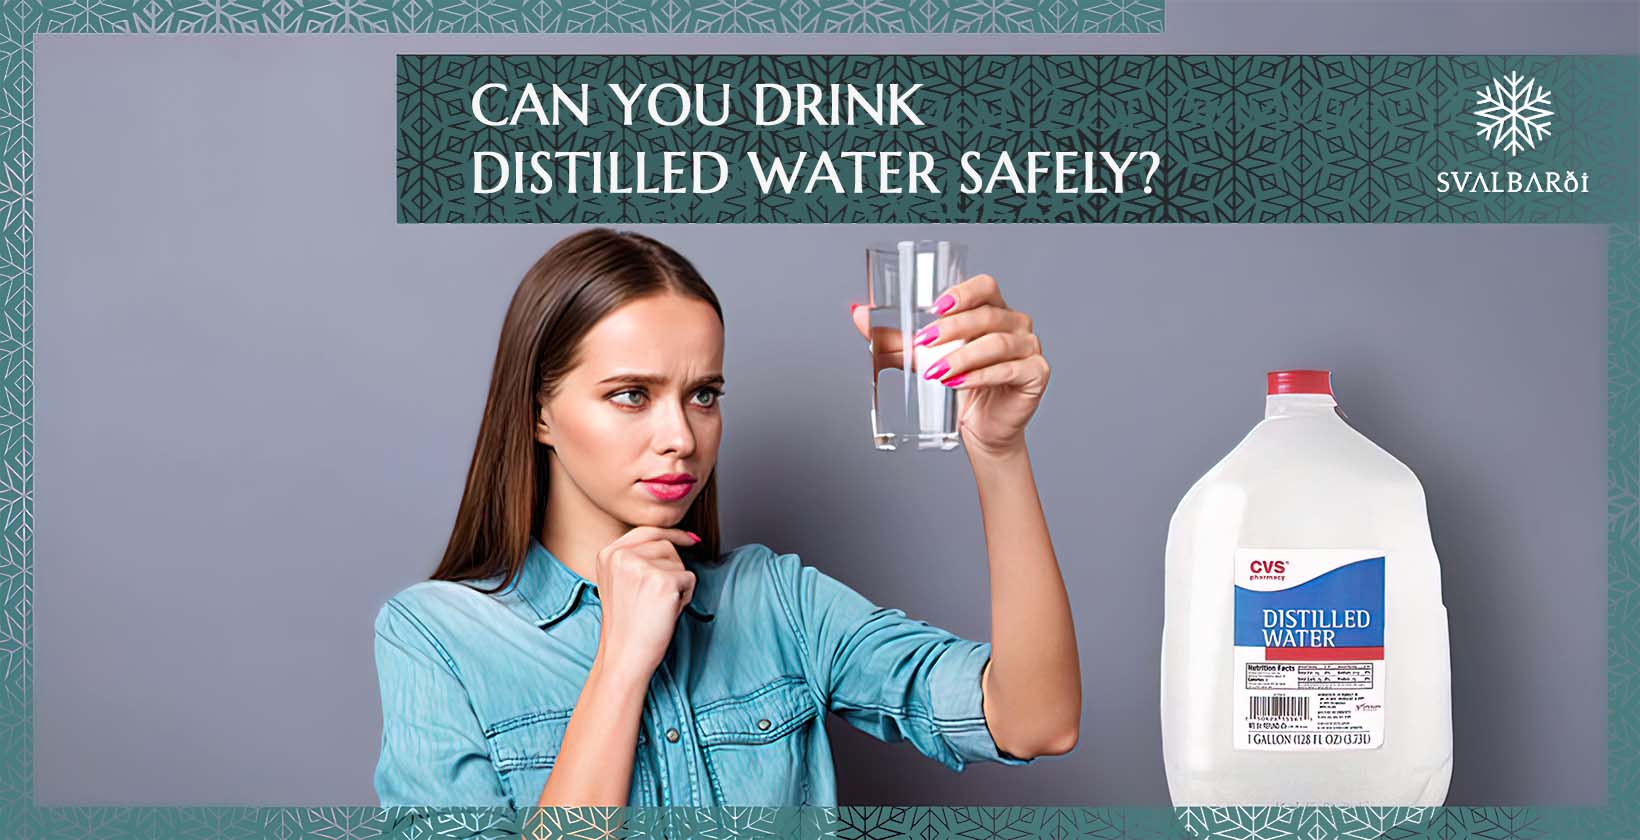 What Is Distilled Water?